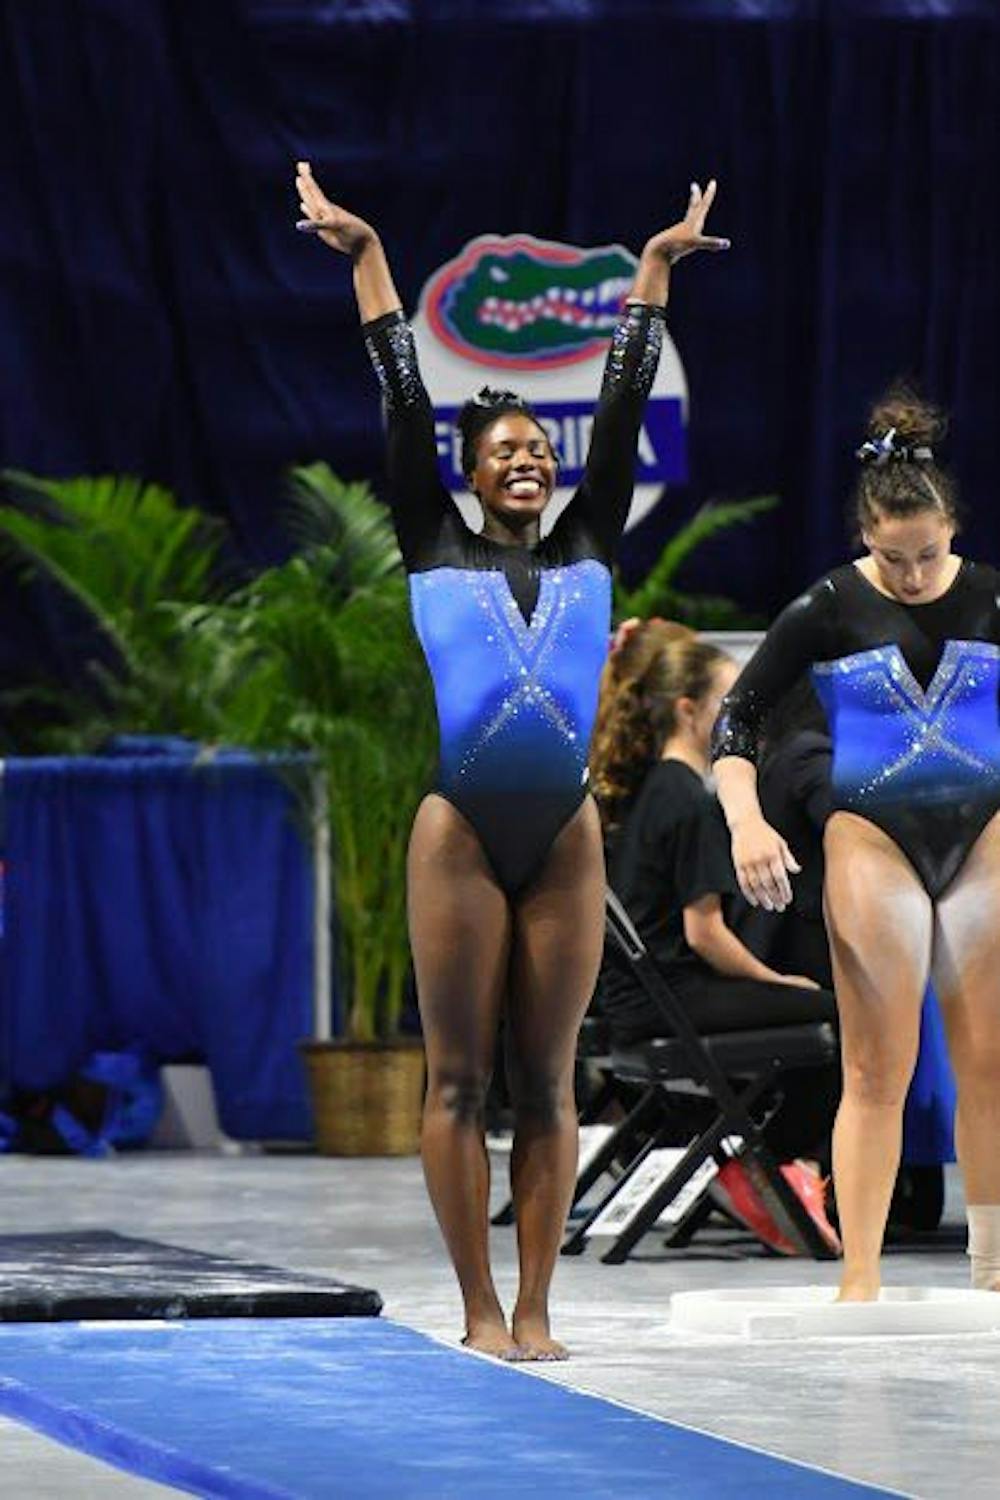 <p>UF gymnast Sierra Alexander finishes performing a routine during Florida's win against Missouri on Feb. 24, 2017, in the O'Connell Center.</p>